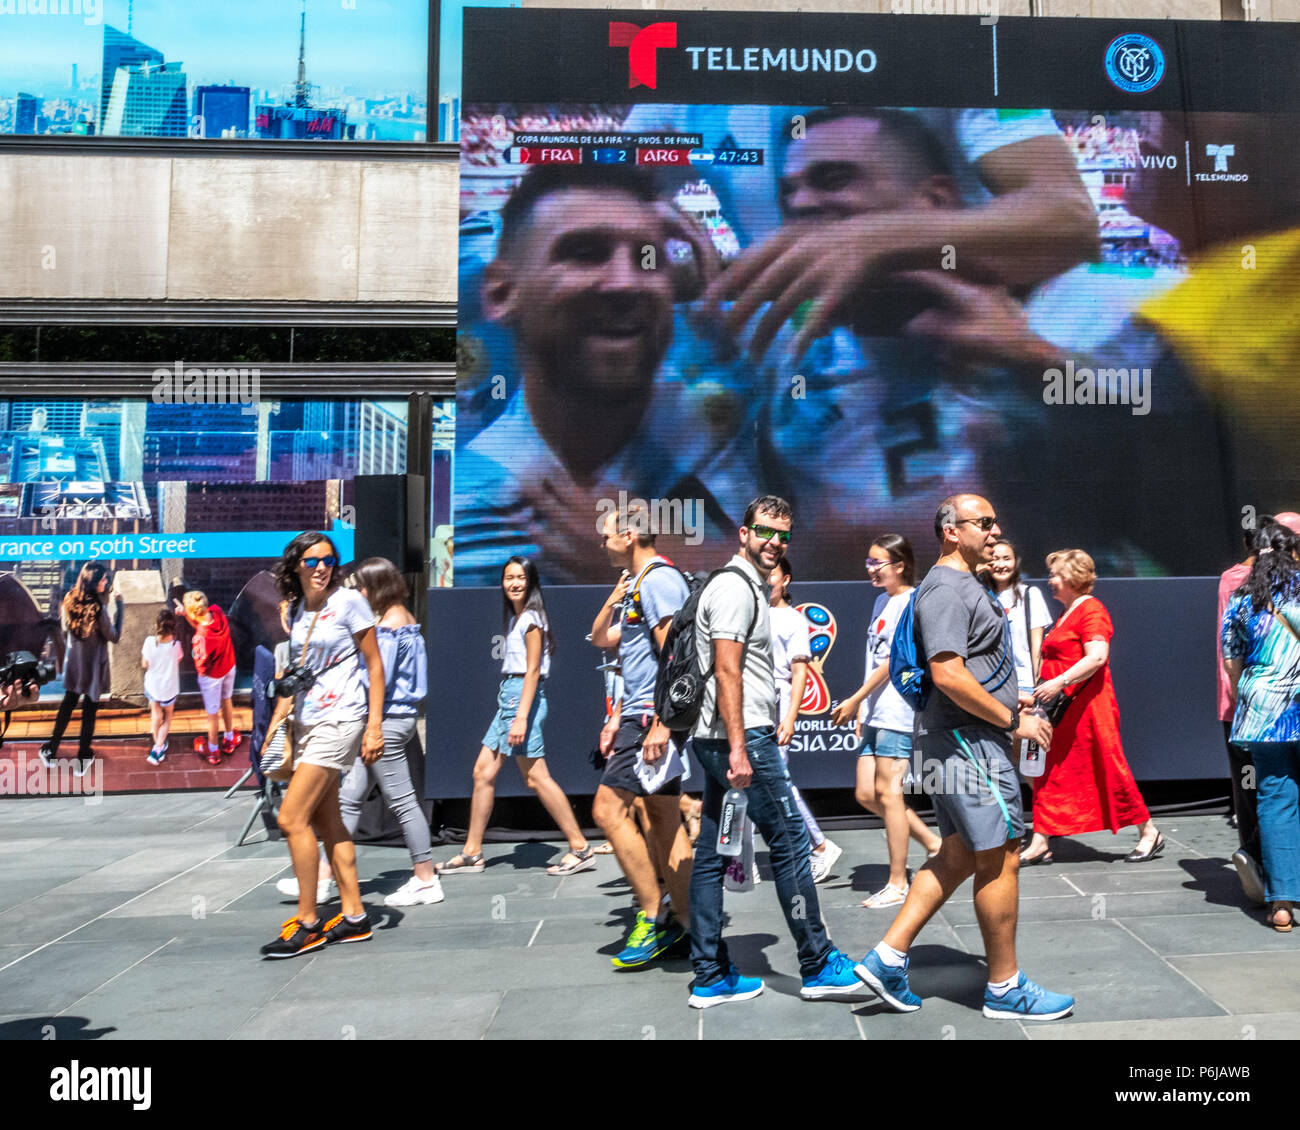 New York, USA, 30 June 2018.  Passers.-by don't pay much attention to Argentina's player Lionel Messi celebrating a goal  against France at the FIFA World Cup in giant screens at New York City's Rockefeller Center. France beat Argentina 4-3 to advance to the quarter finals.  Photo by Enrique ShoreCredit: Enrique Shore/Alamy Live News Stock Photo